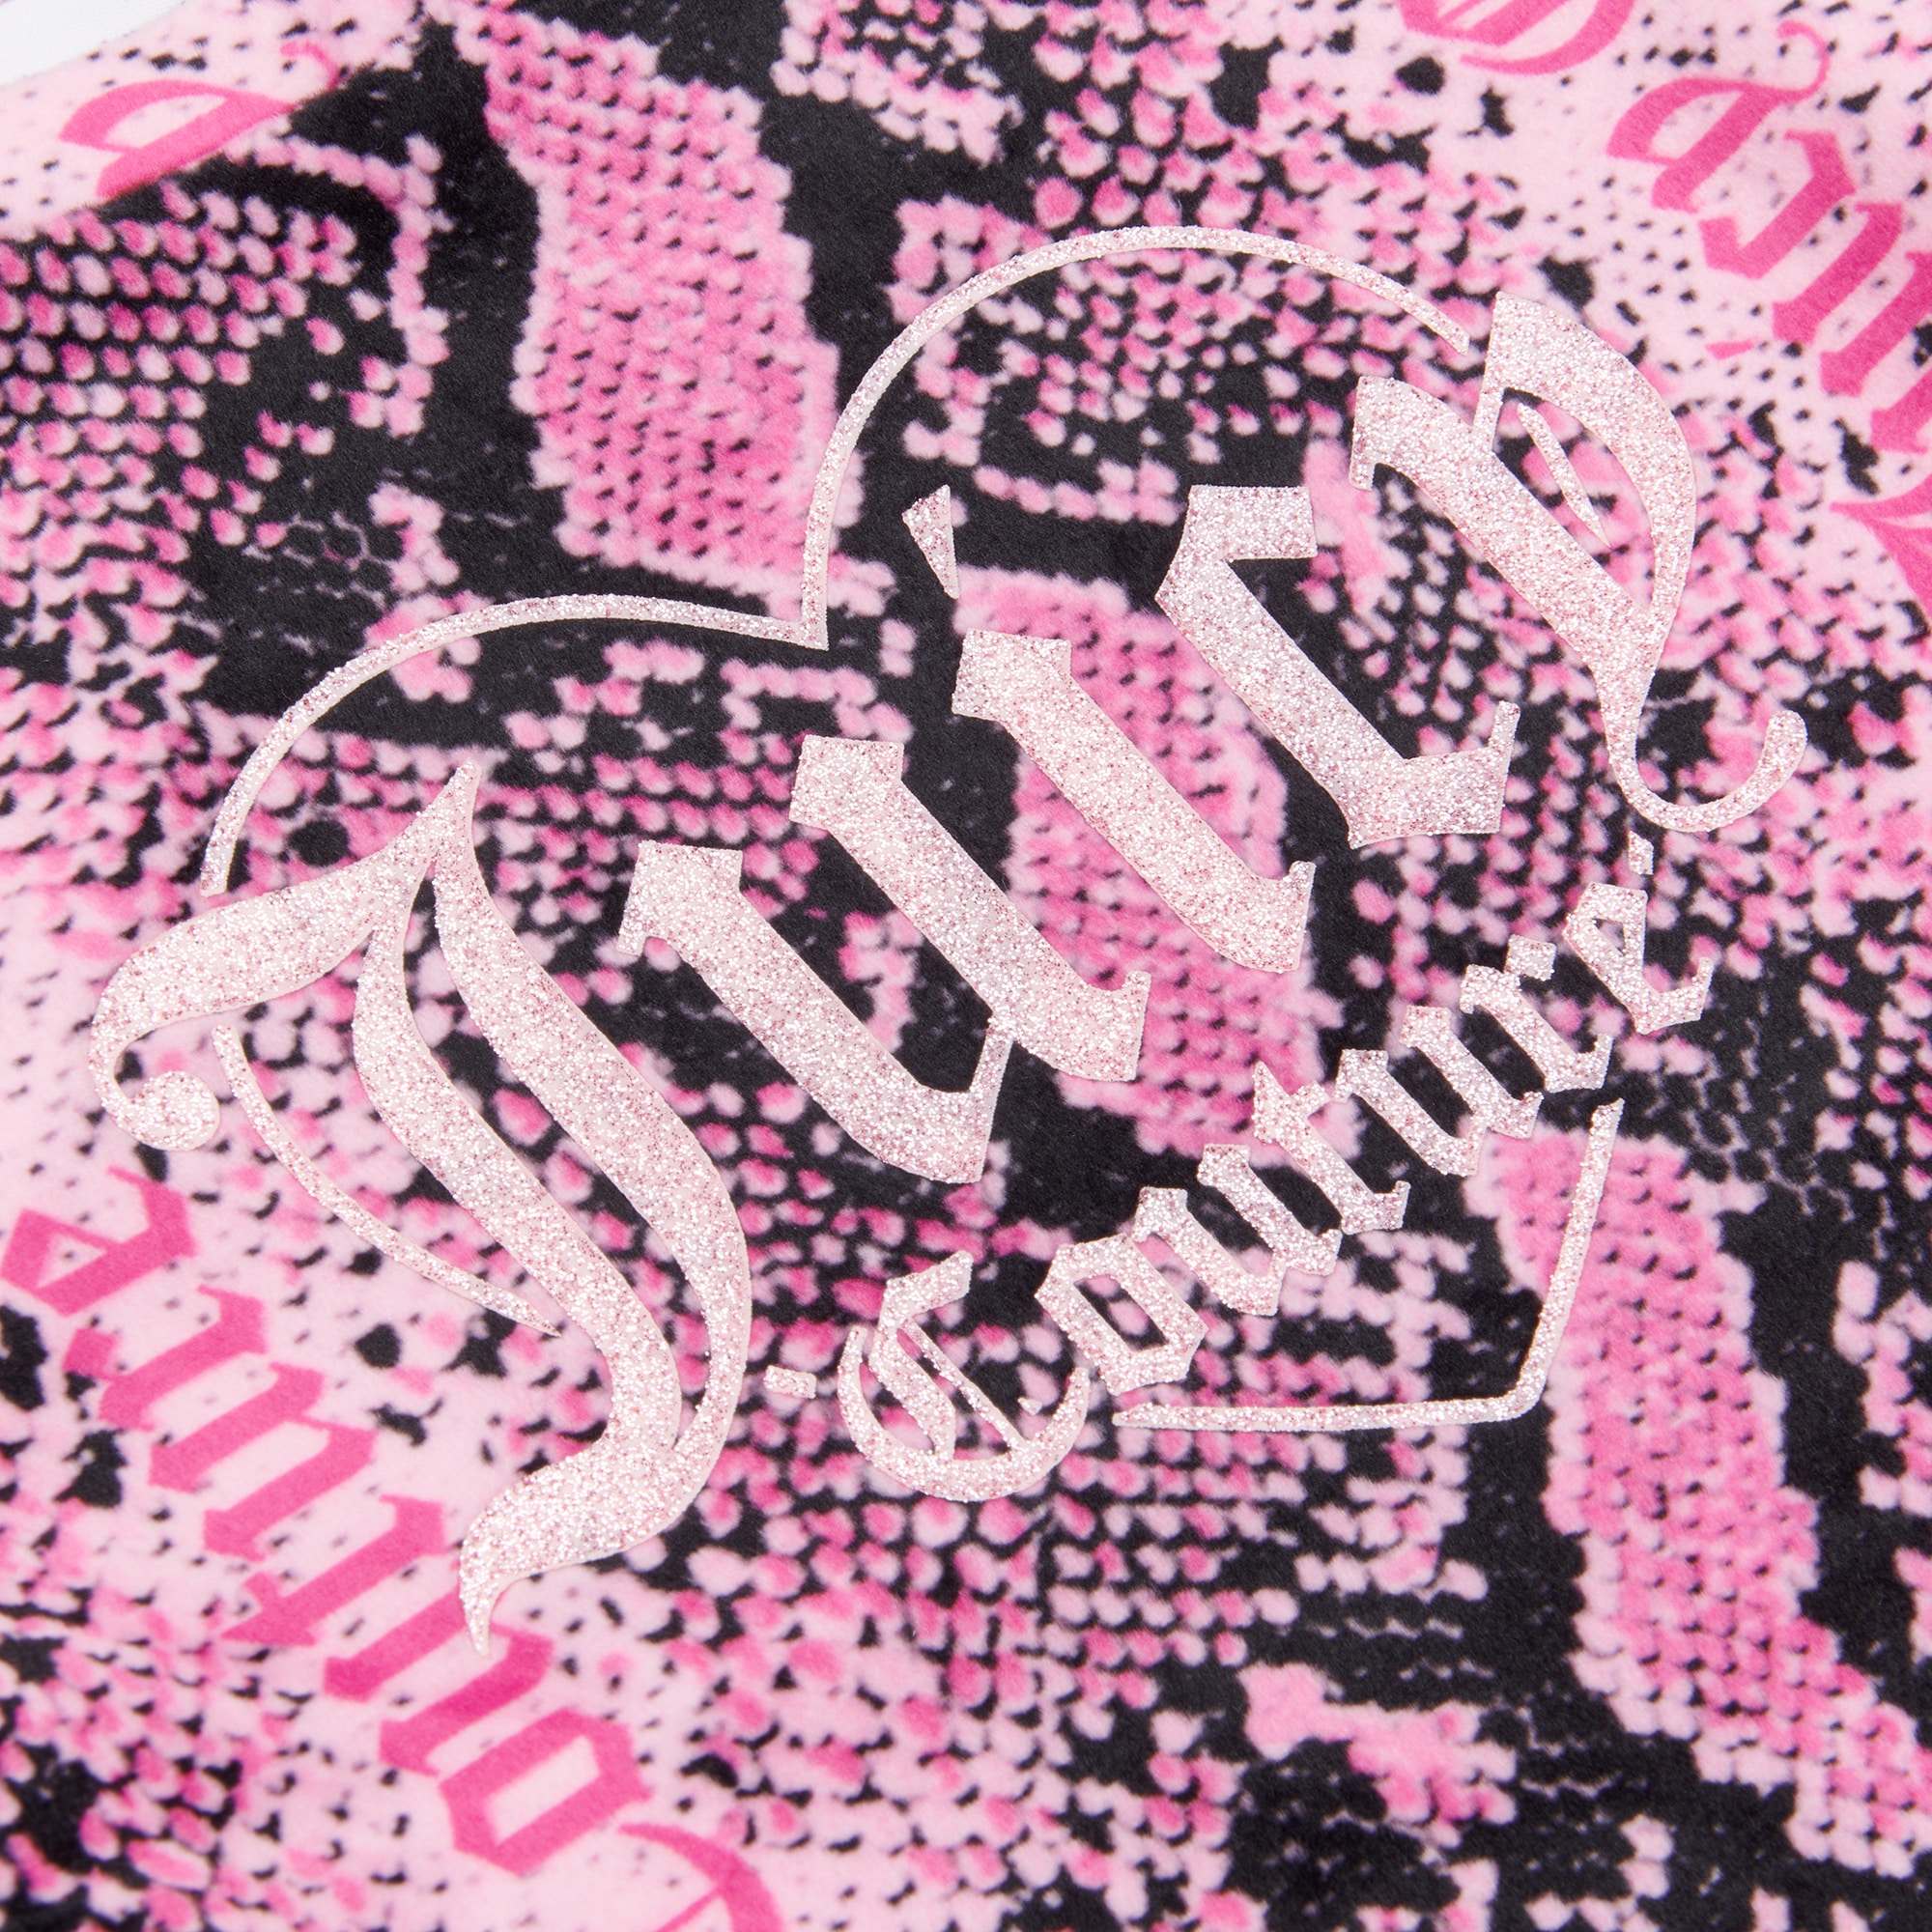 Juicy Couture snakeskin pink girls dress close up